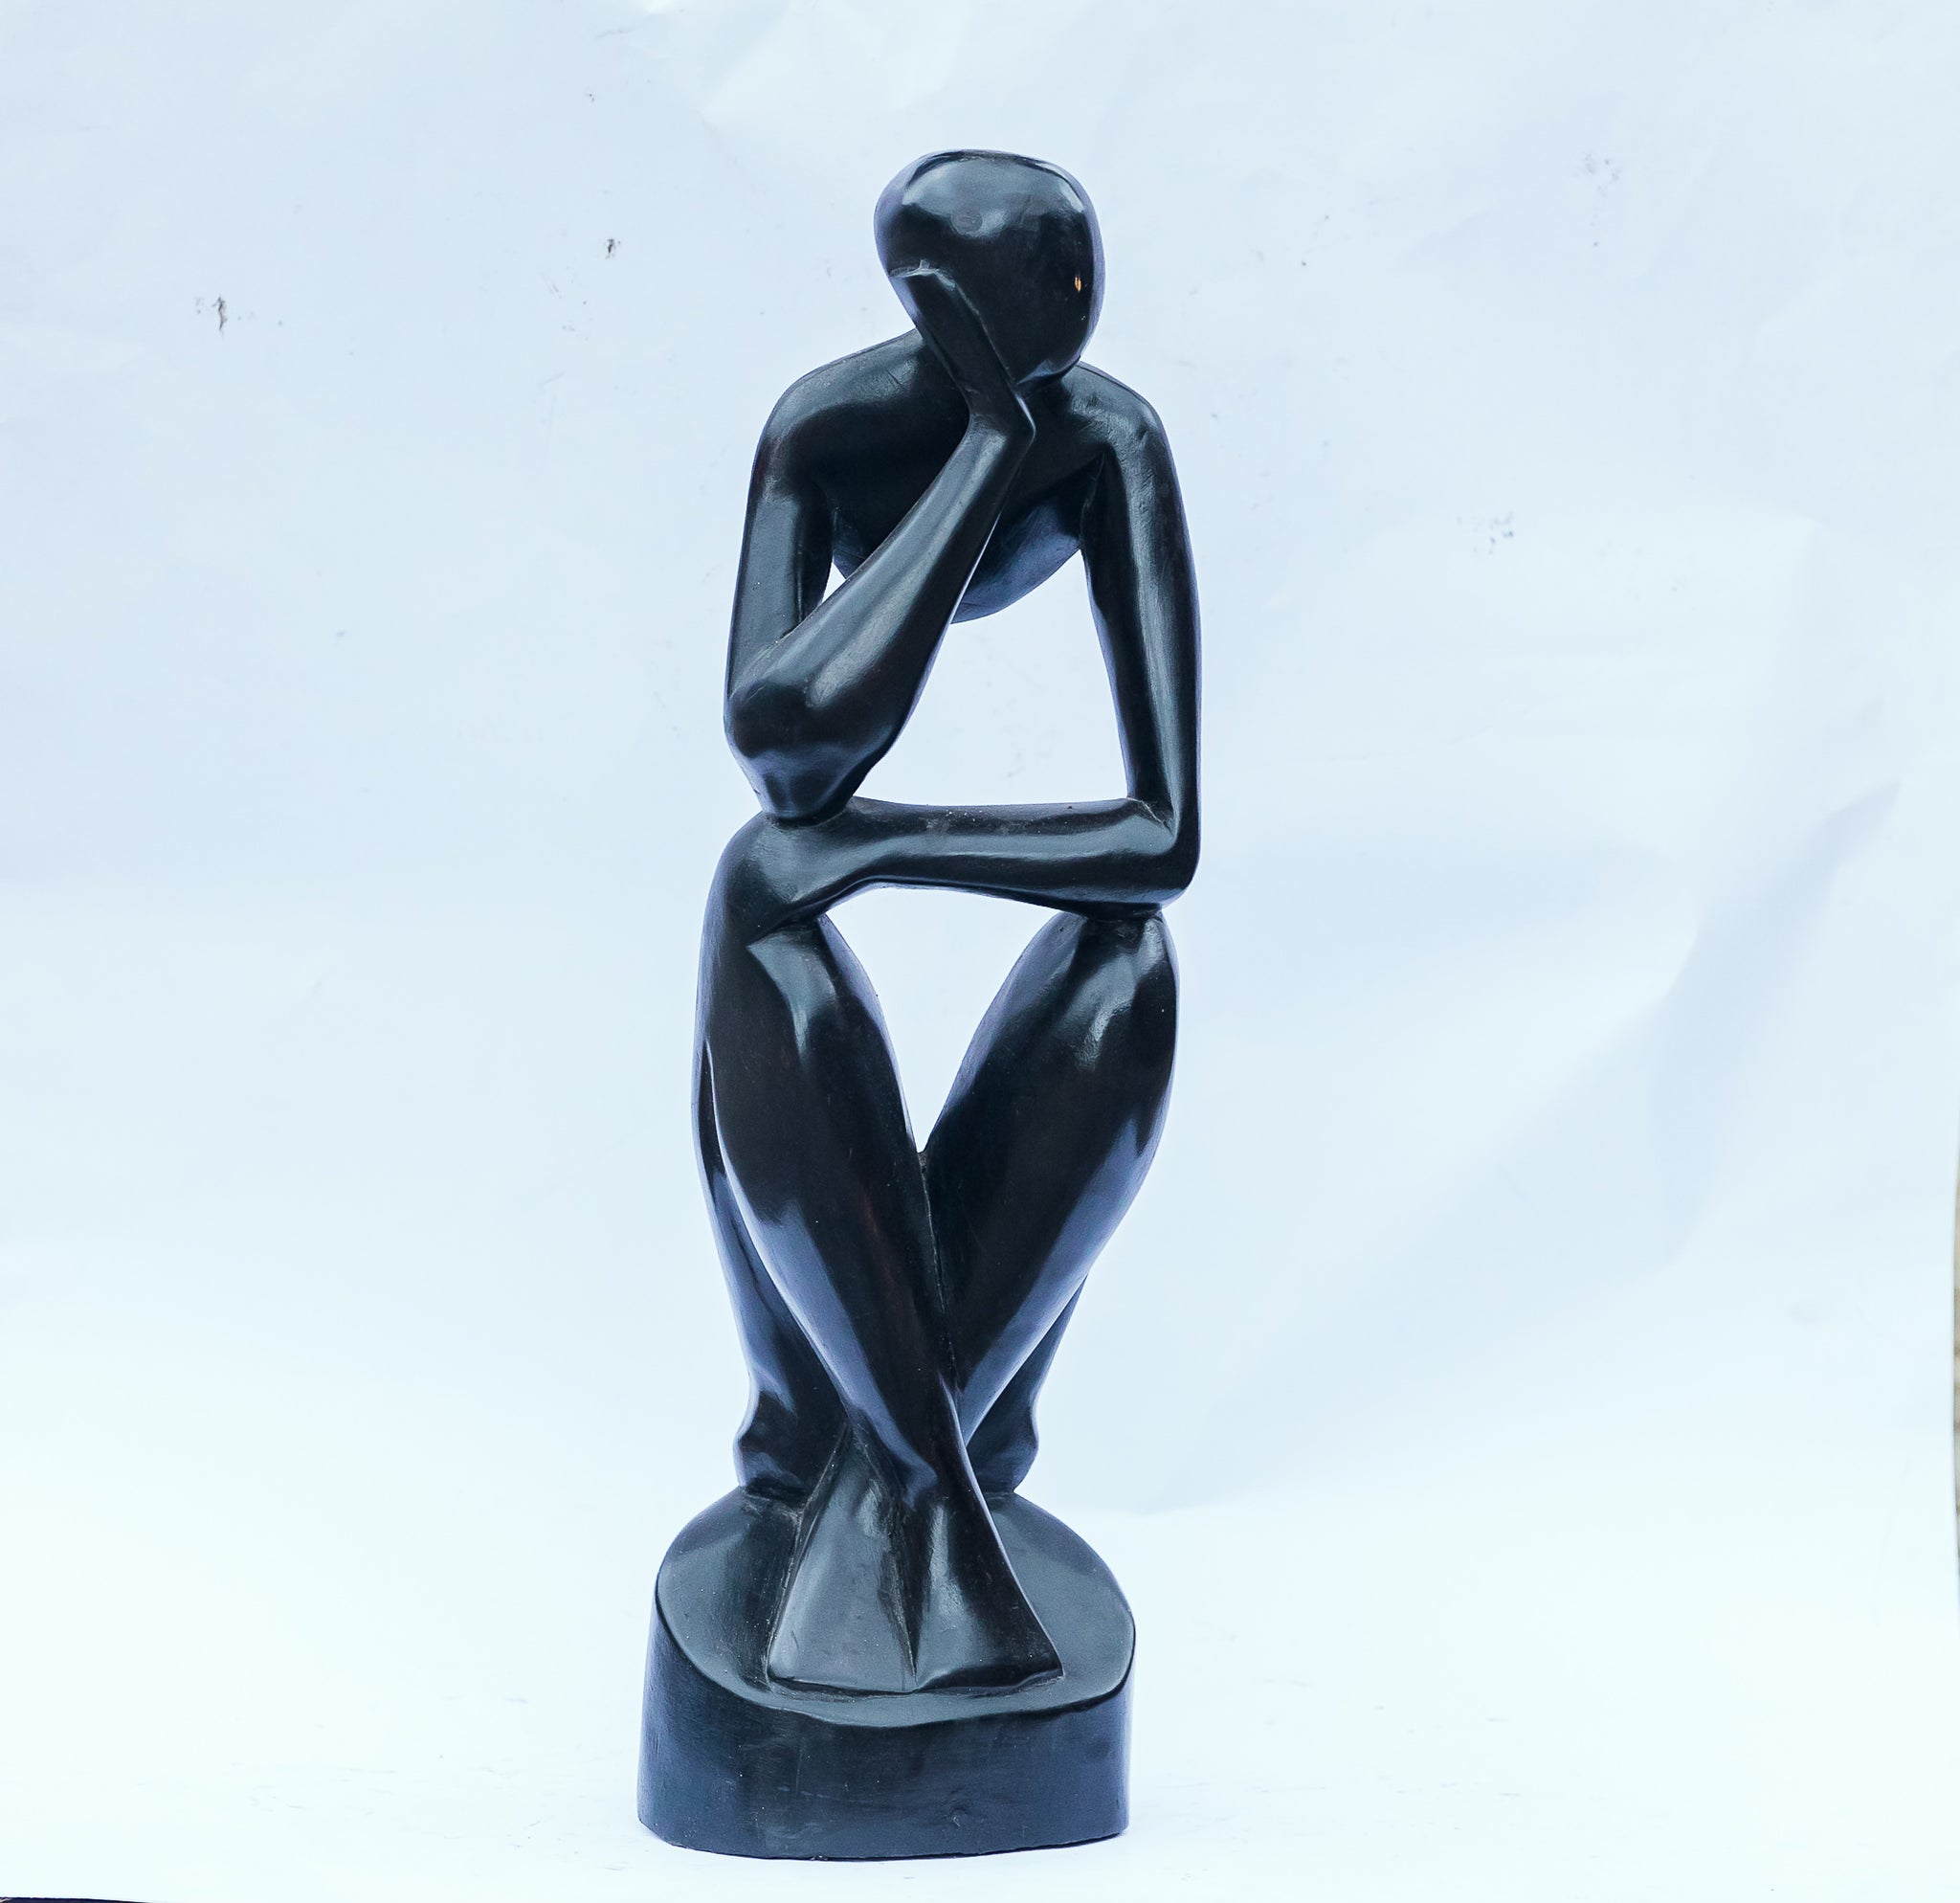 African Wood Sculpture-Man sitting cross-legged Hand on Chin thinking, hand-carved of white wood, Ghana, West Africa 51 cm X 15 cm